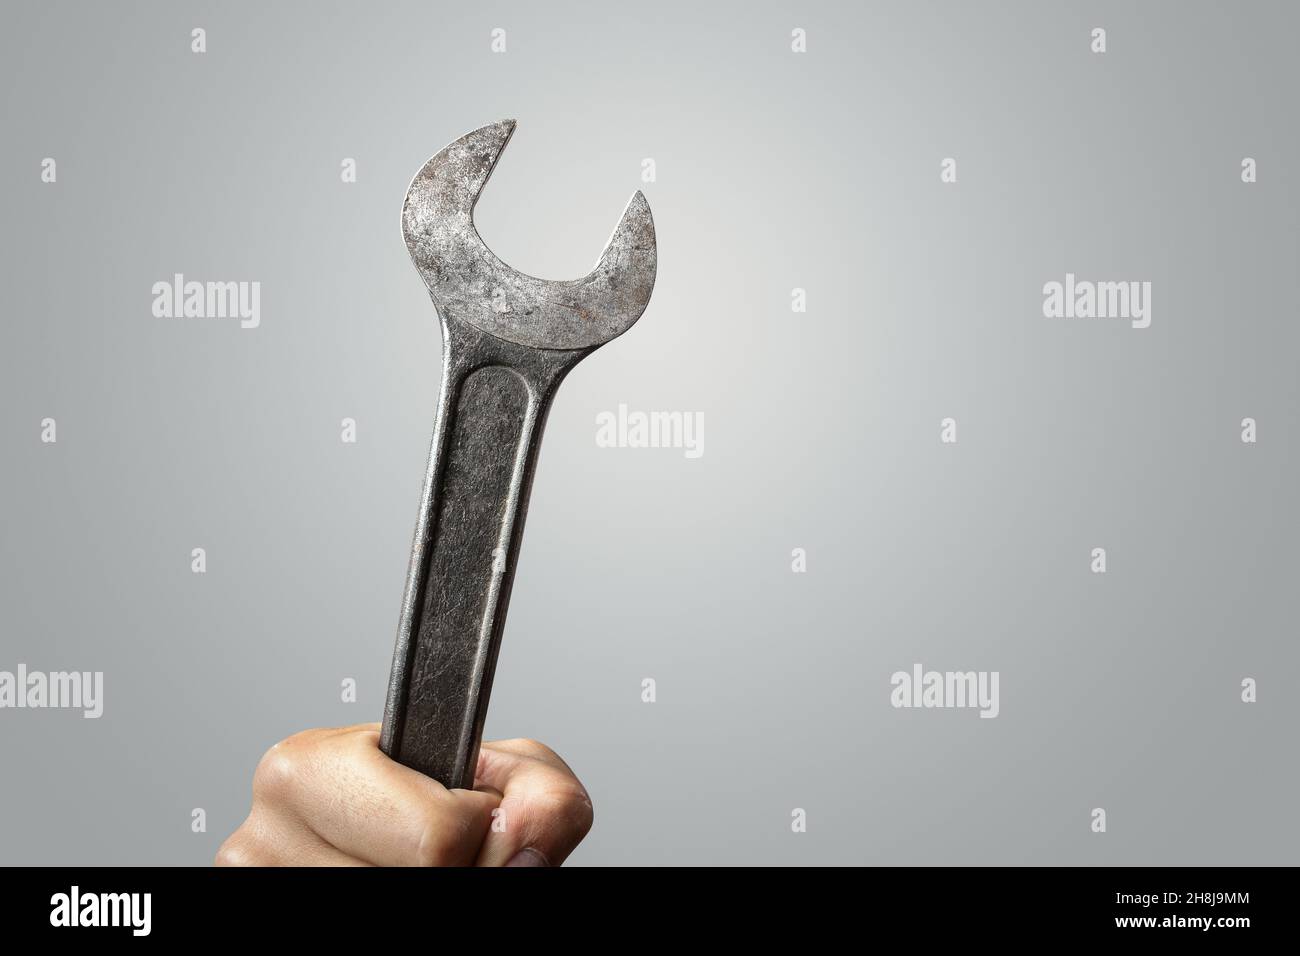 Large wrench tool held by a hand Stock Photo